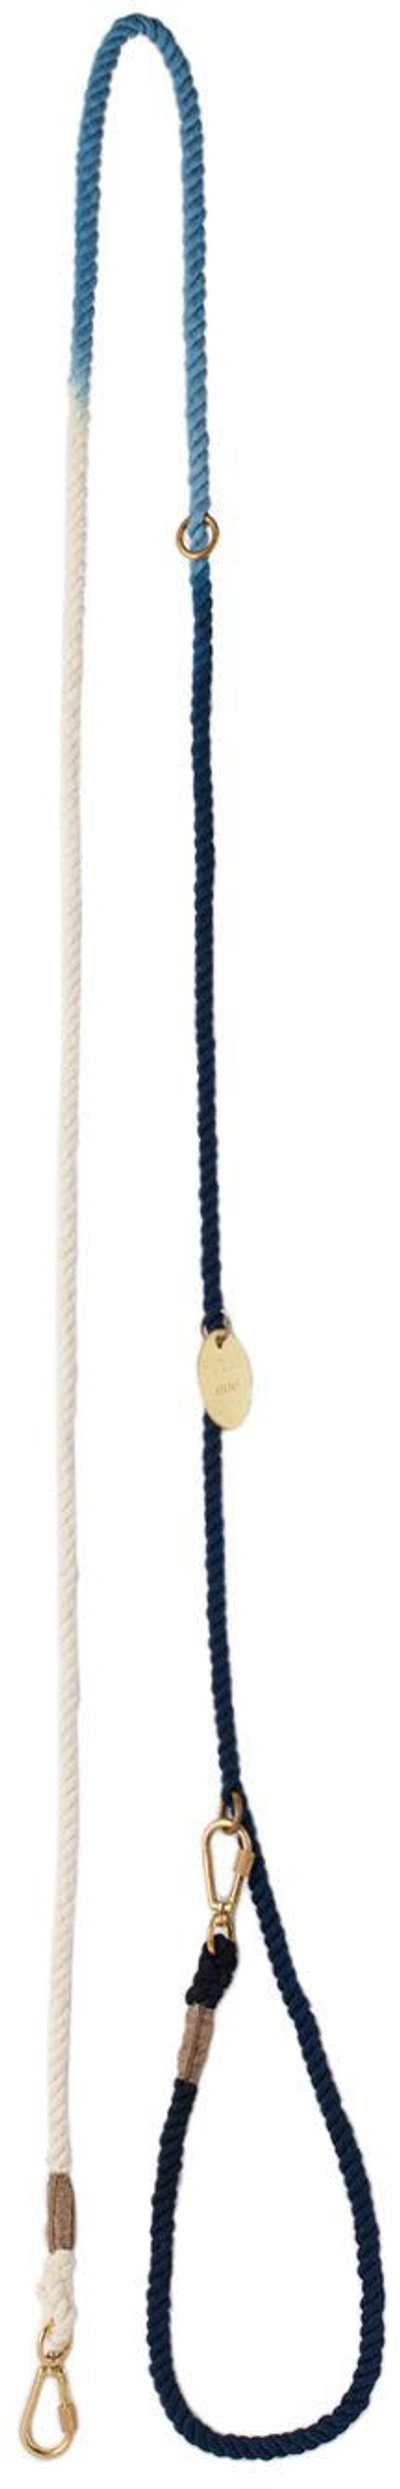 Found My Animal Blue Rope Leash In Indigo Ombre